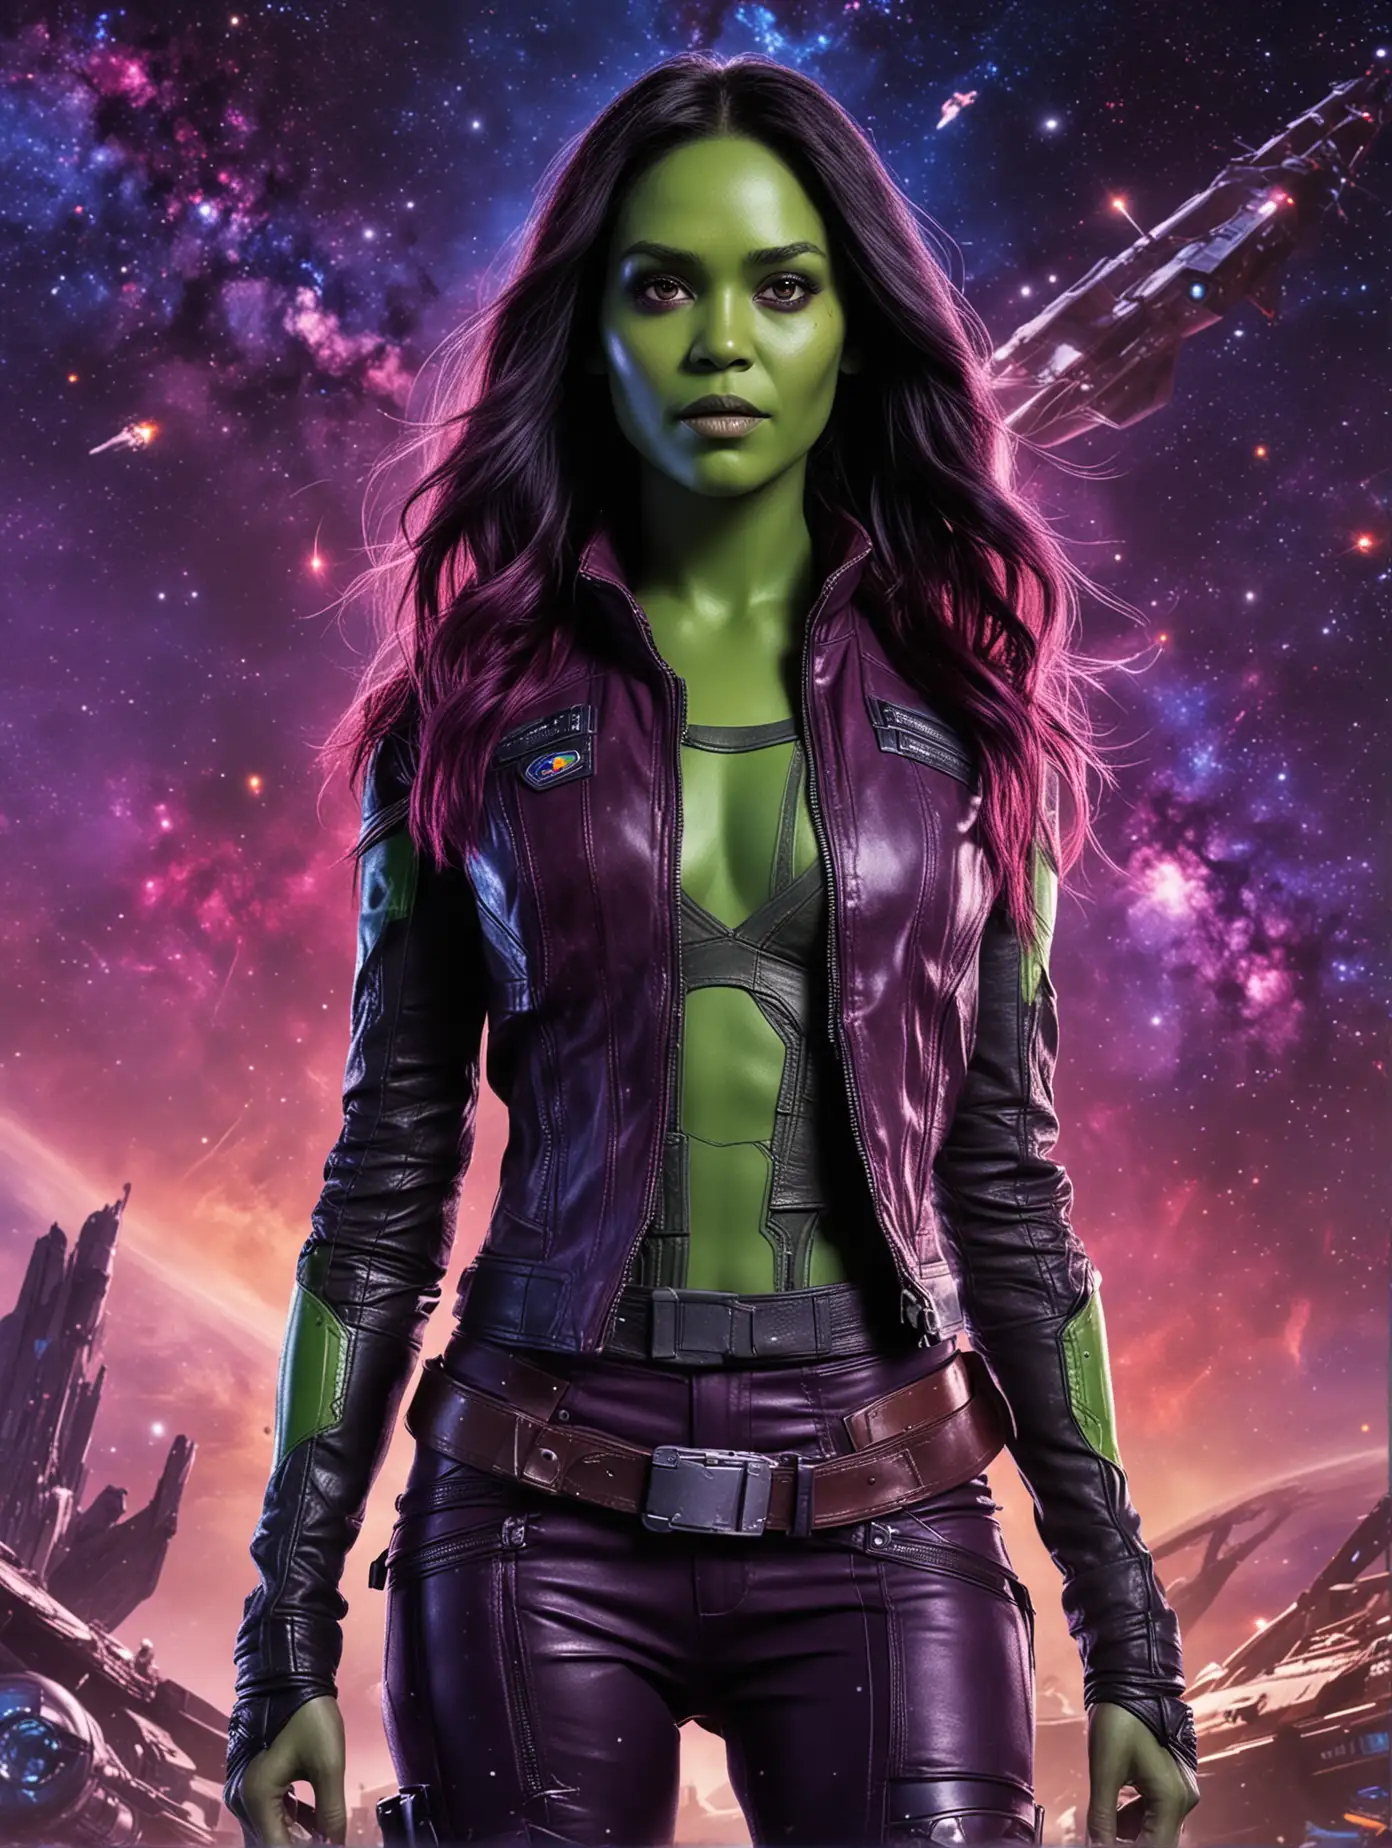 Gamora from the movie "Guardians of the Galaxy" wearing a cropped tight leather vest in a full body shot, with a beautiful face and hair streaked with purple, she is standing in front of an intergalactic space station background, with galaxys in the sky and vibrant colors in the style of a cinematic movie poster. --ar 29:37